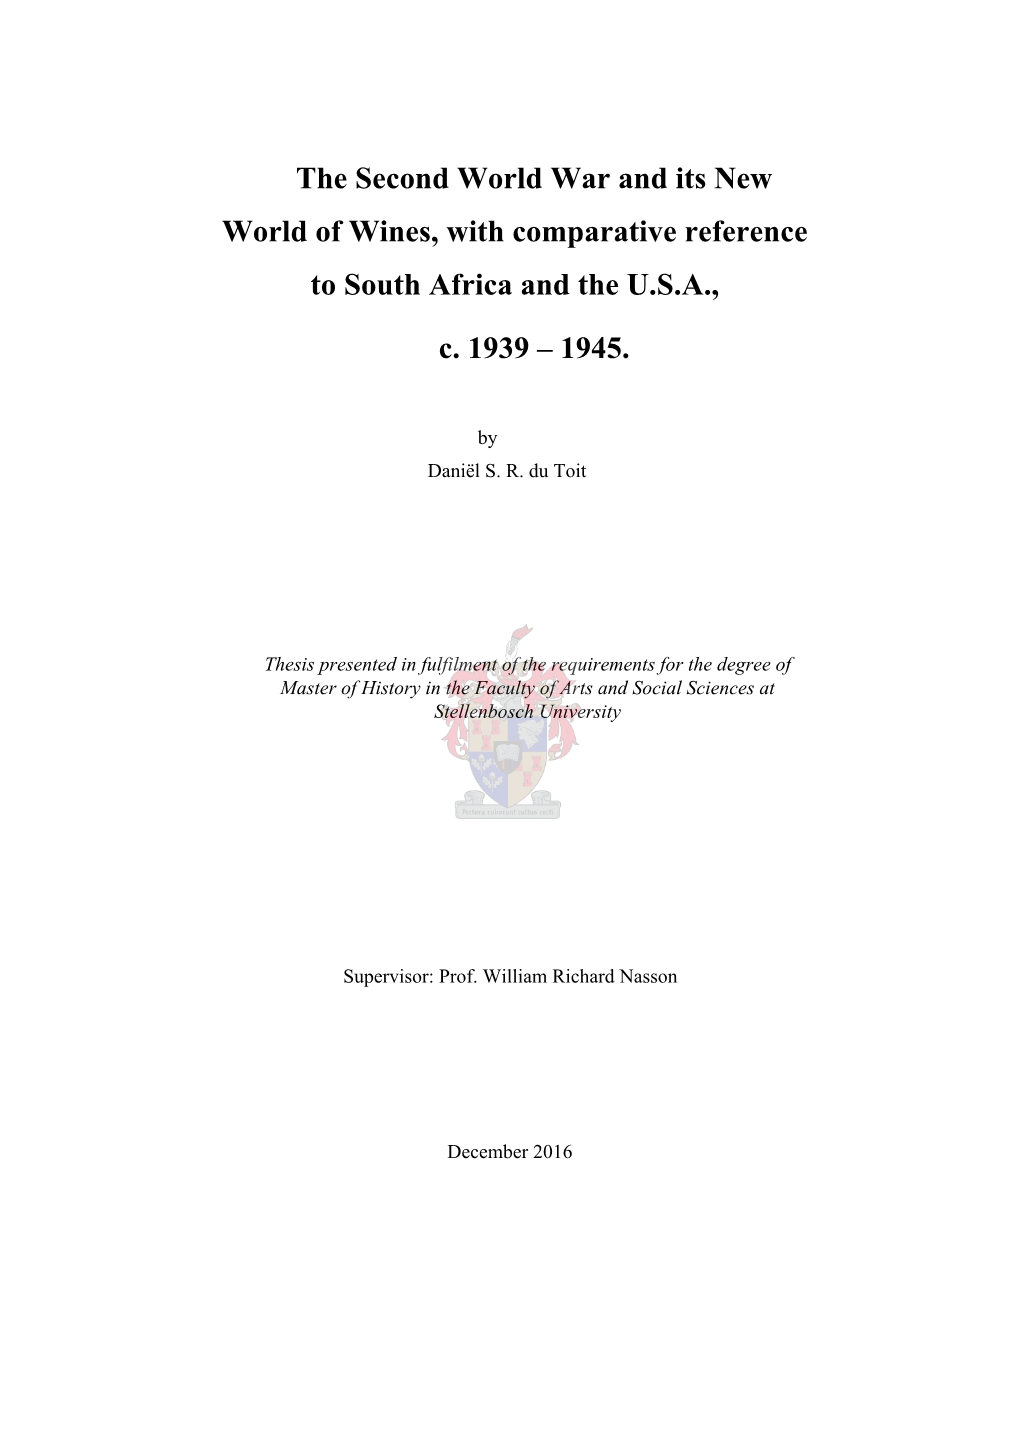 The Second World War and Its New World of Wines, with Comparative Reference to South Africa and the U.S.A